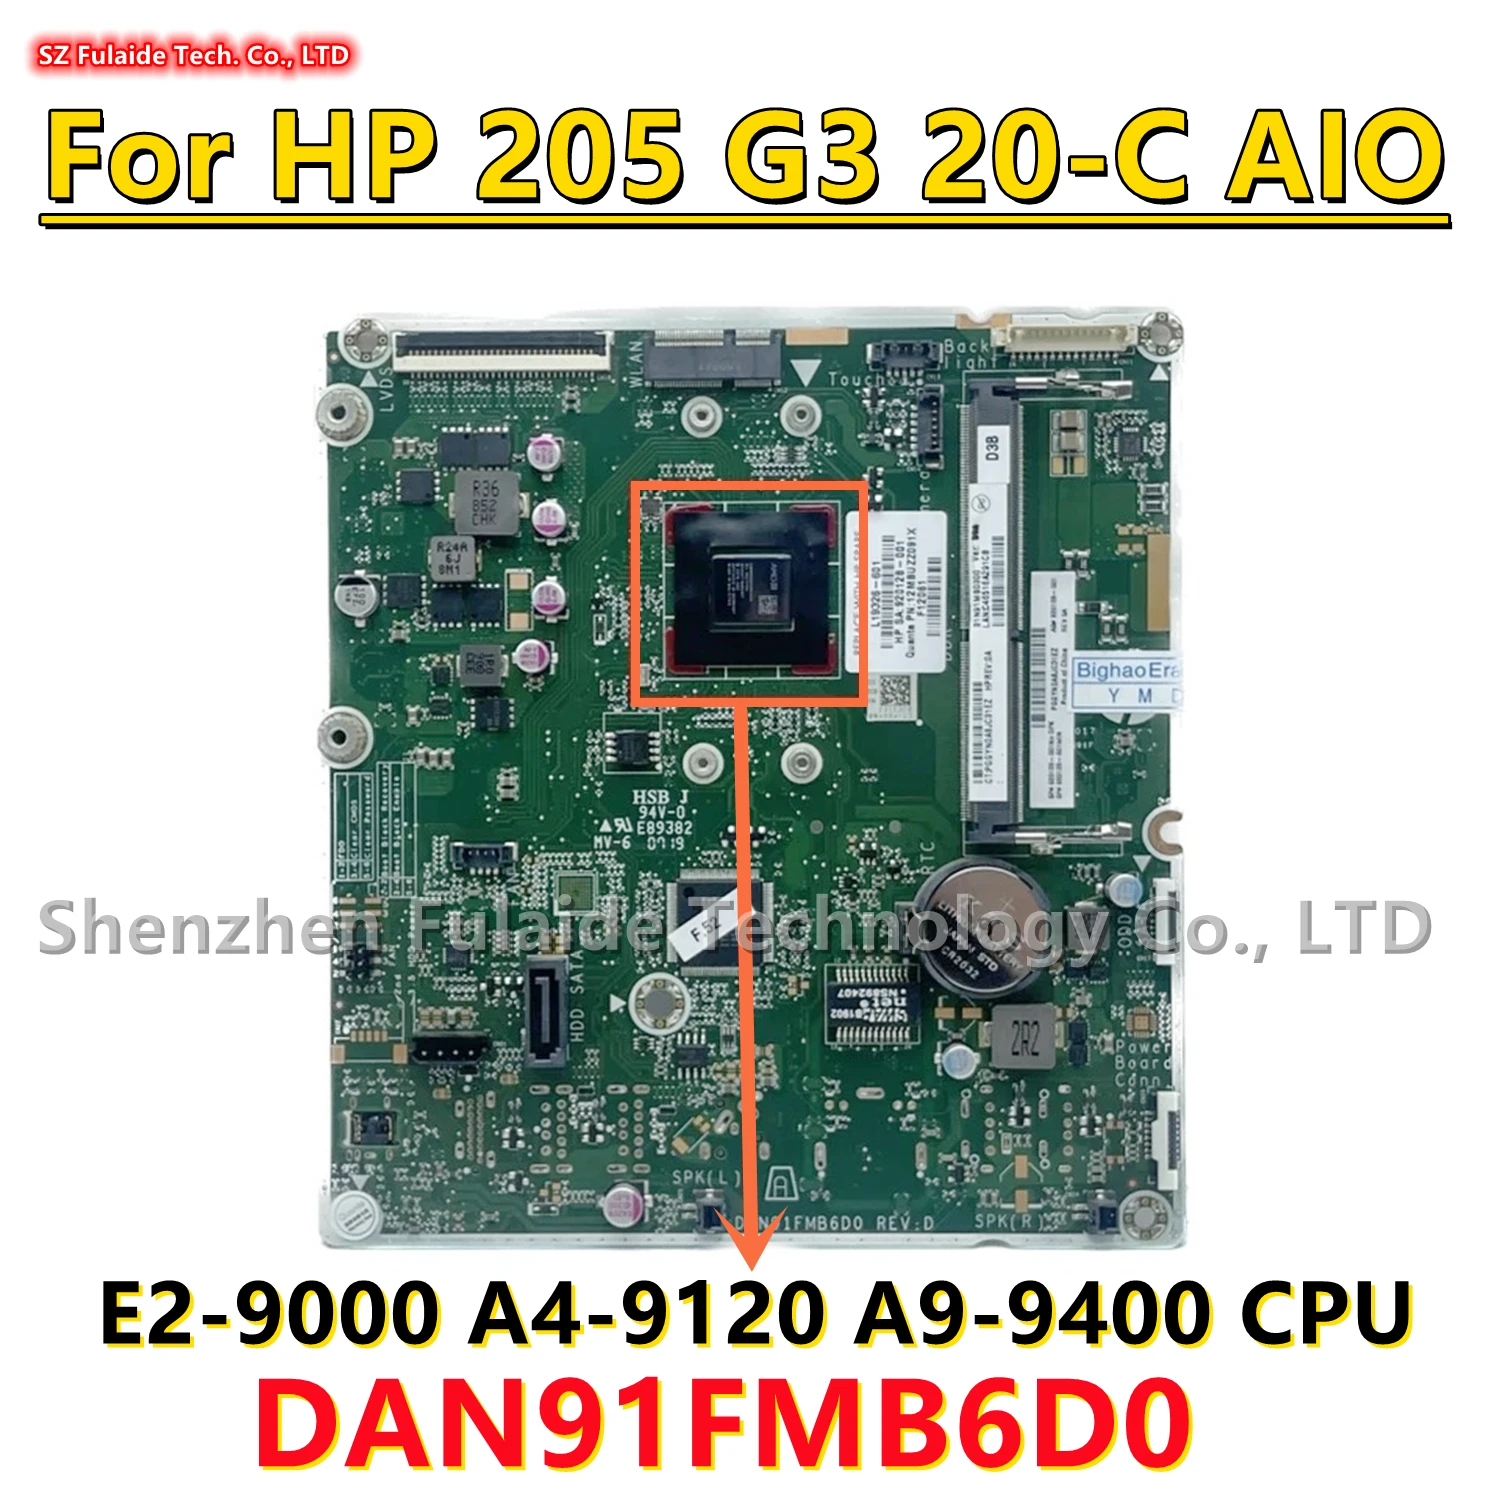 

DAN91FMB6D0 For HP 205 G3 20-C 20-C3201 AIO Motherboard With E2-9000 A4-9120 A9-9400 CPU 920128-603 L19326-601 920128-601 DDR4